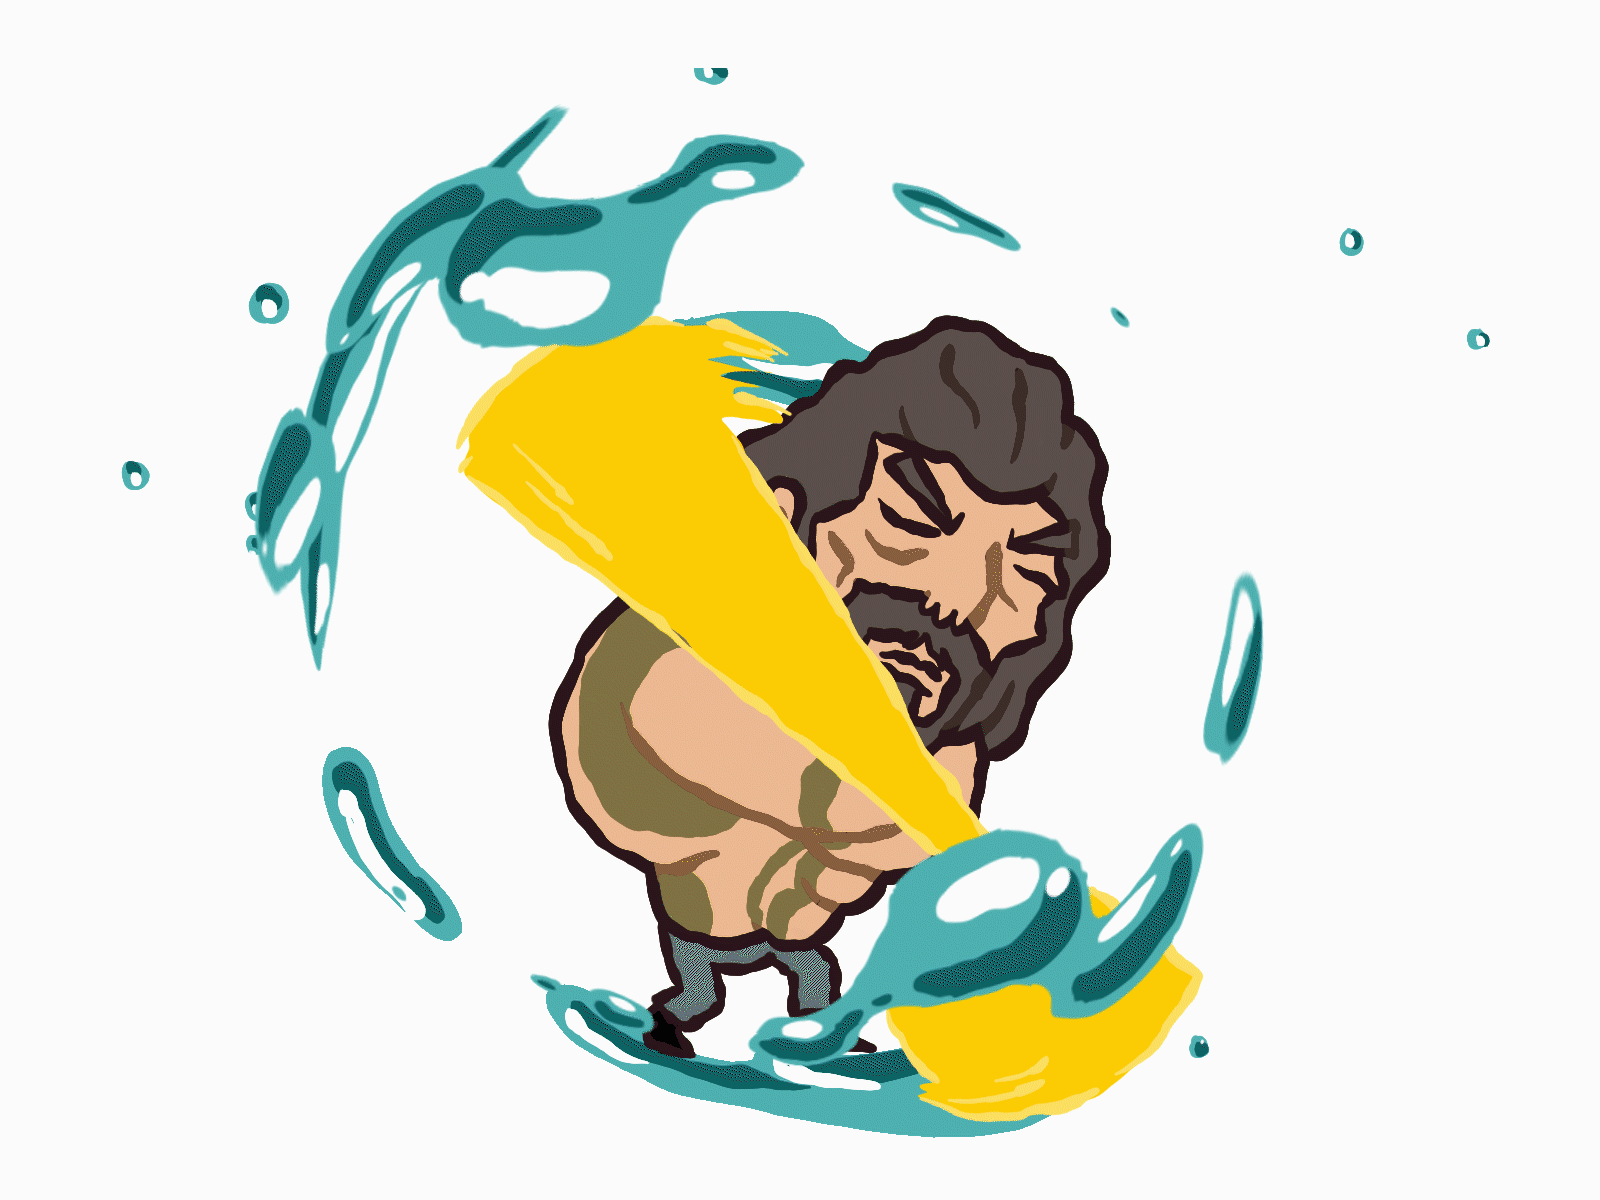 Aquaman Spin Attack Loop 2d animation animated gif animation aqua aquaman attack character character animation character design design illustration justice league loop man snyder snydercut spin spin attack vector zack snyder